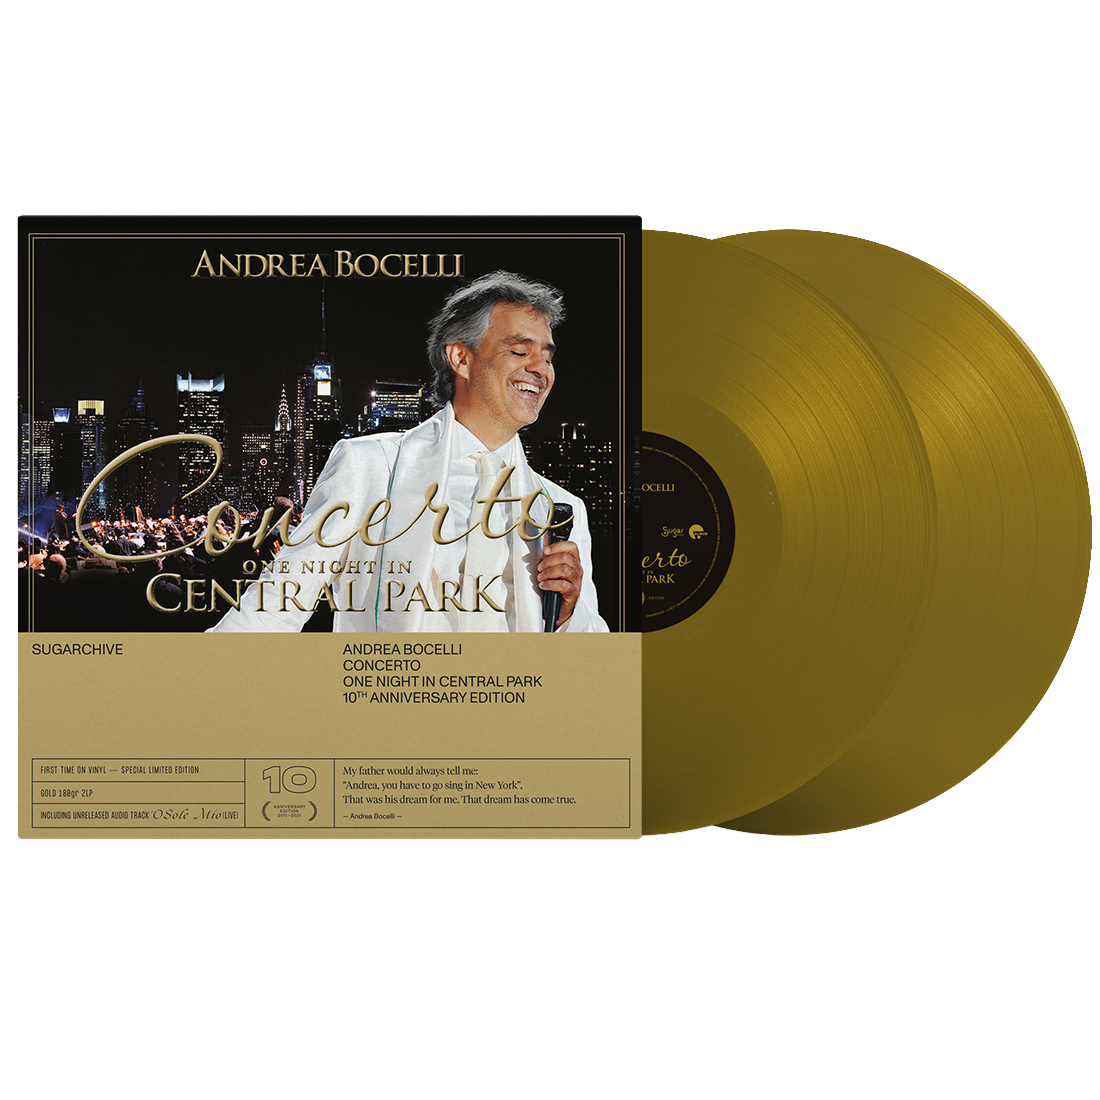 Concerto: One night in Central Park - 10th Anniversary Edition Gold Vinyl 2LP